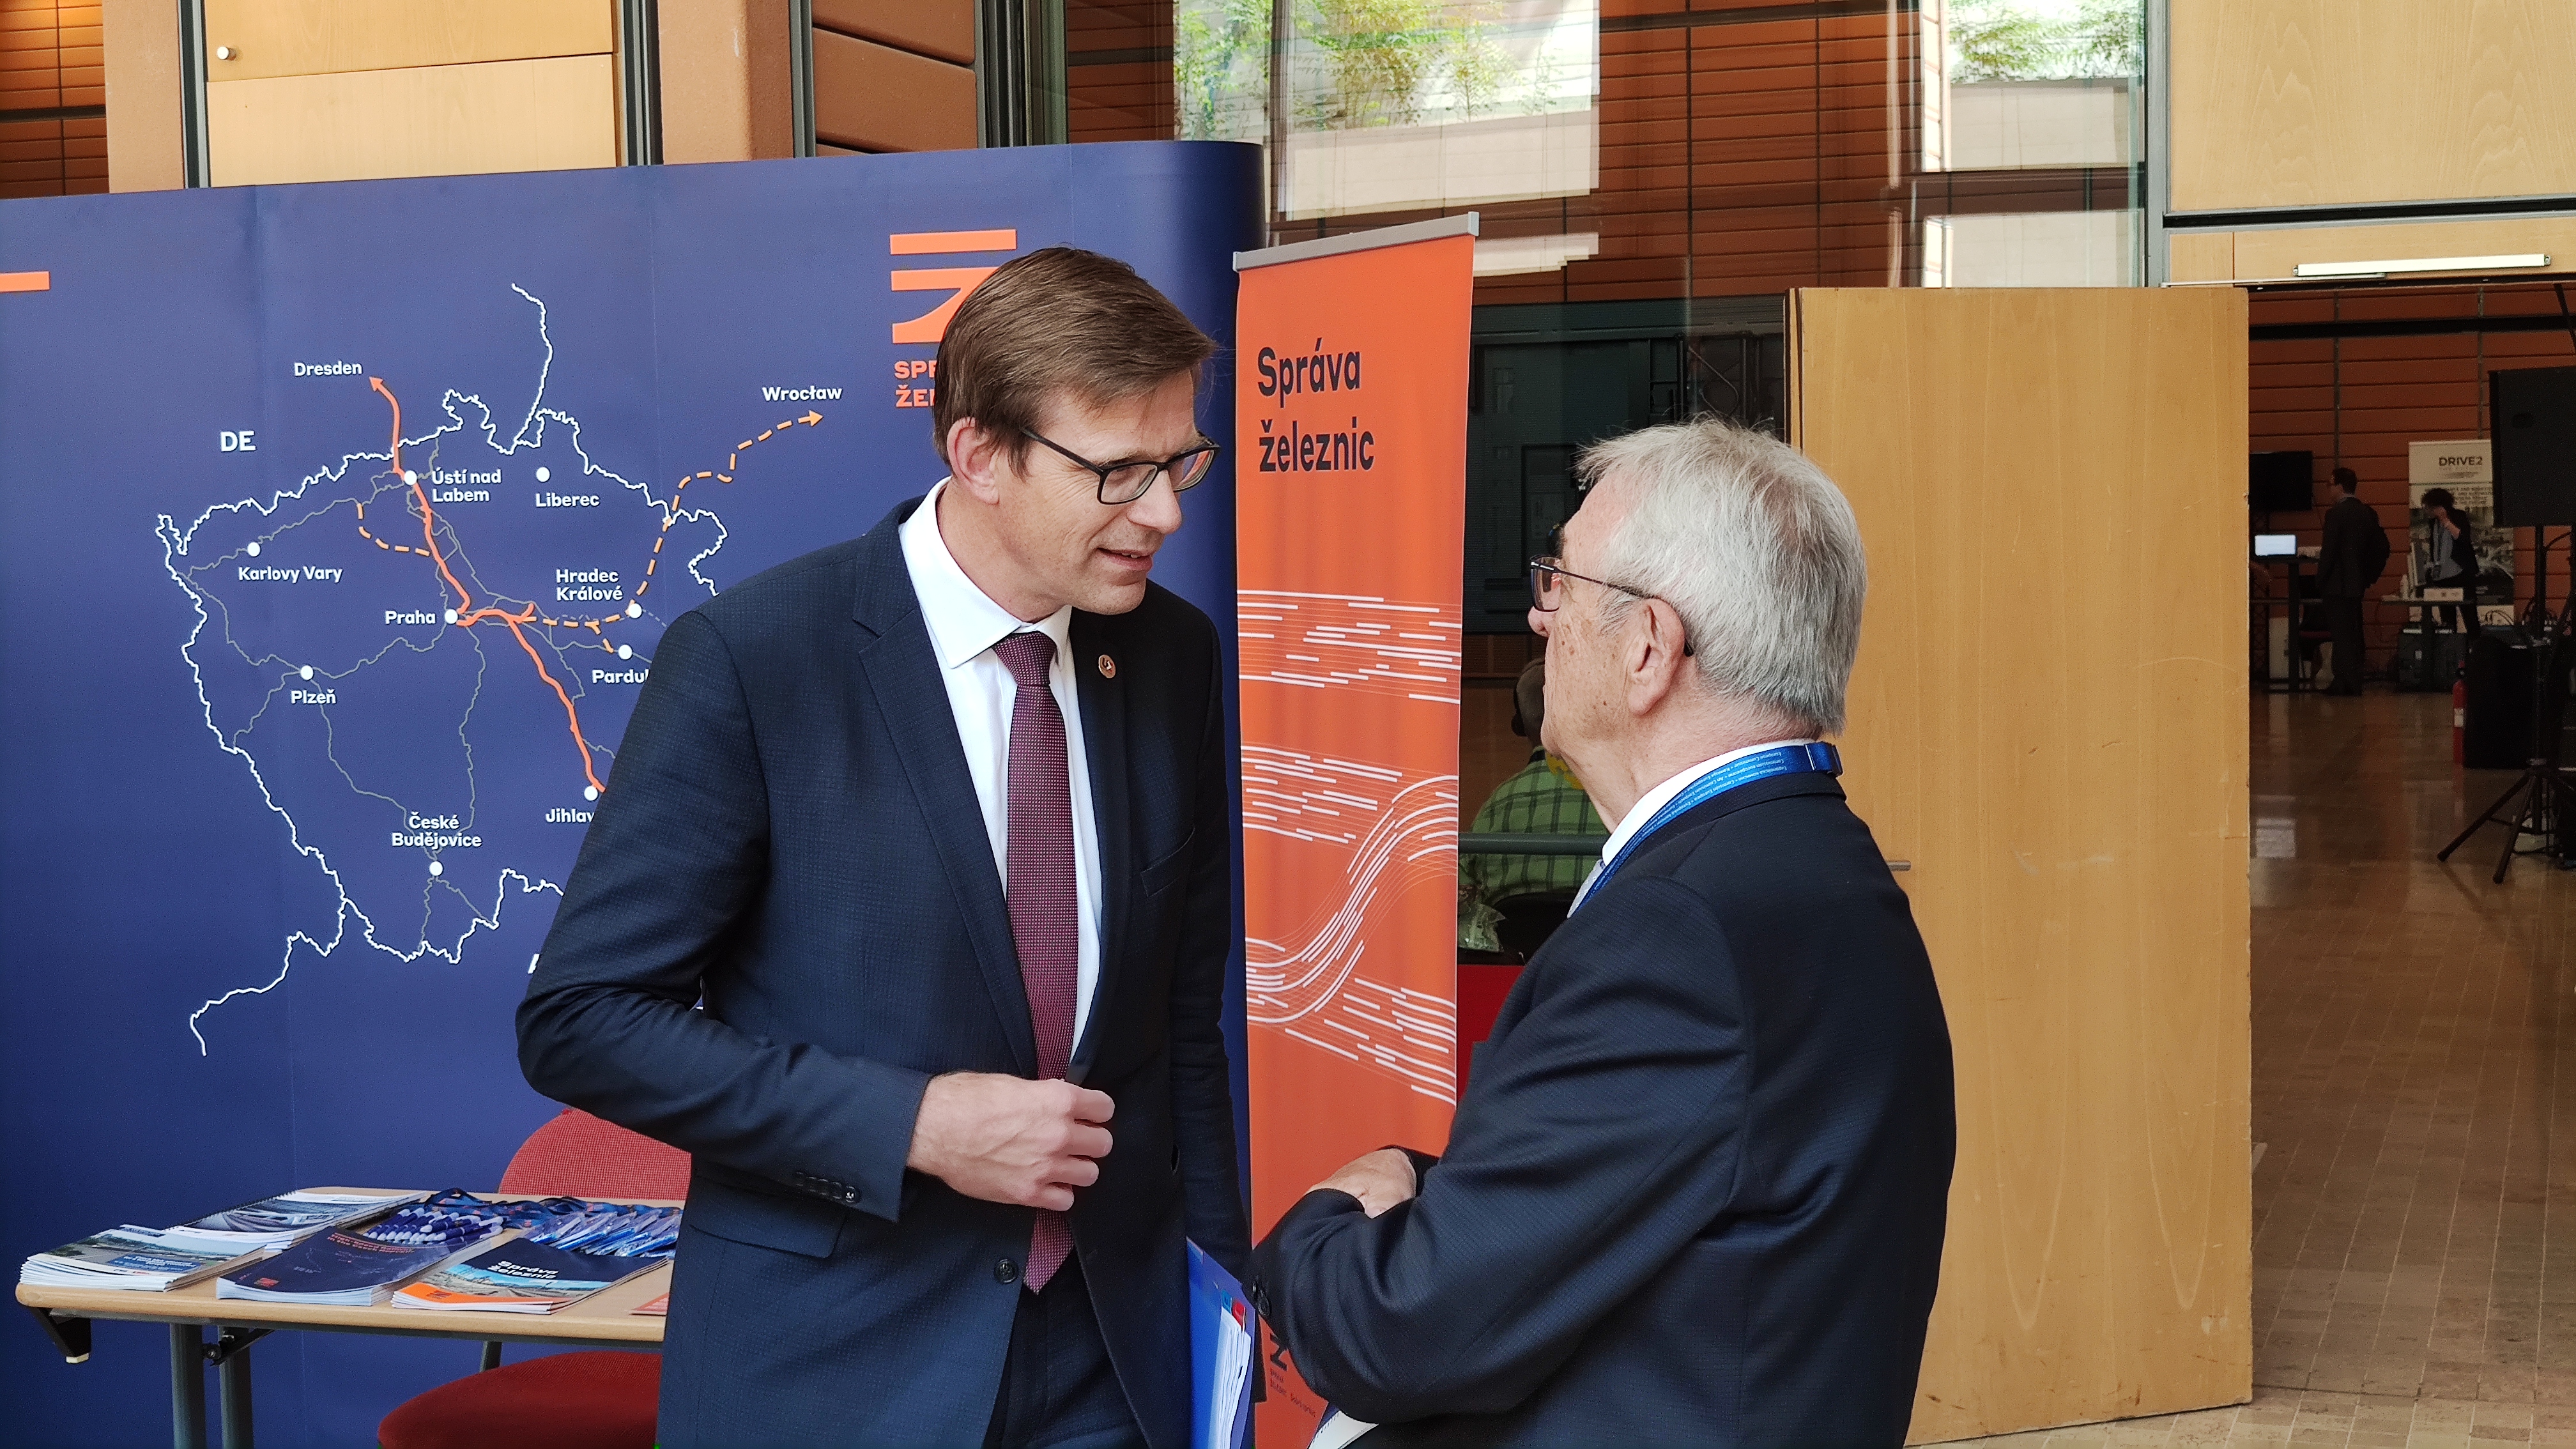 Minister Kupka attended a meeting of European transport experts in Lyon